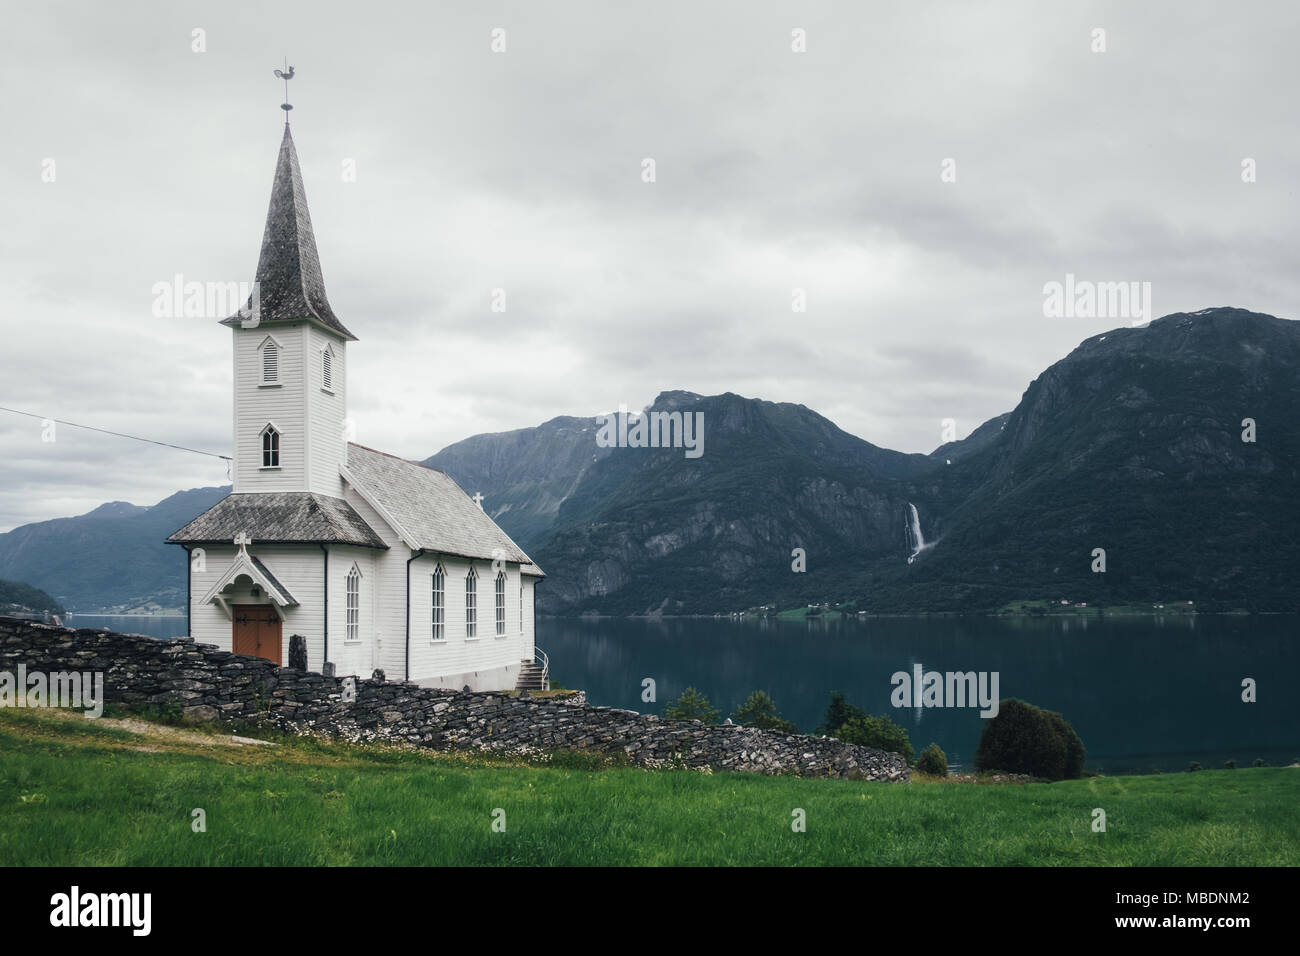 Typical christianity church in Norway Stock Photo